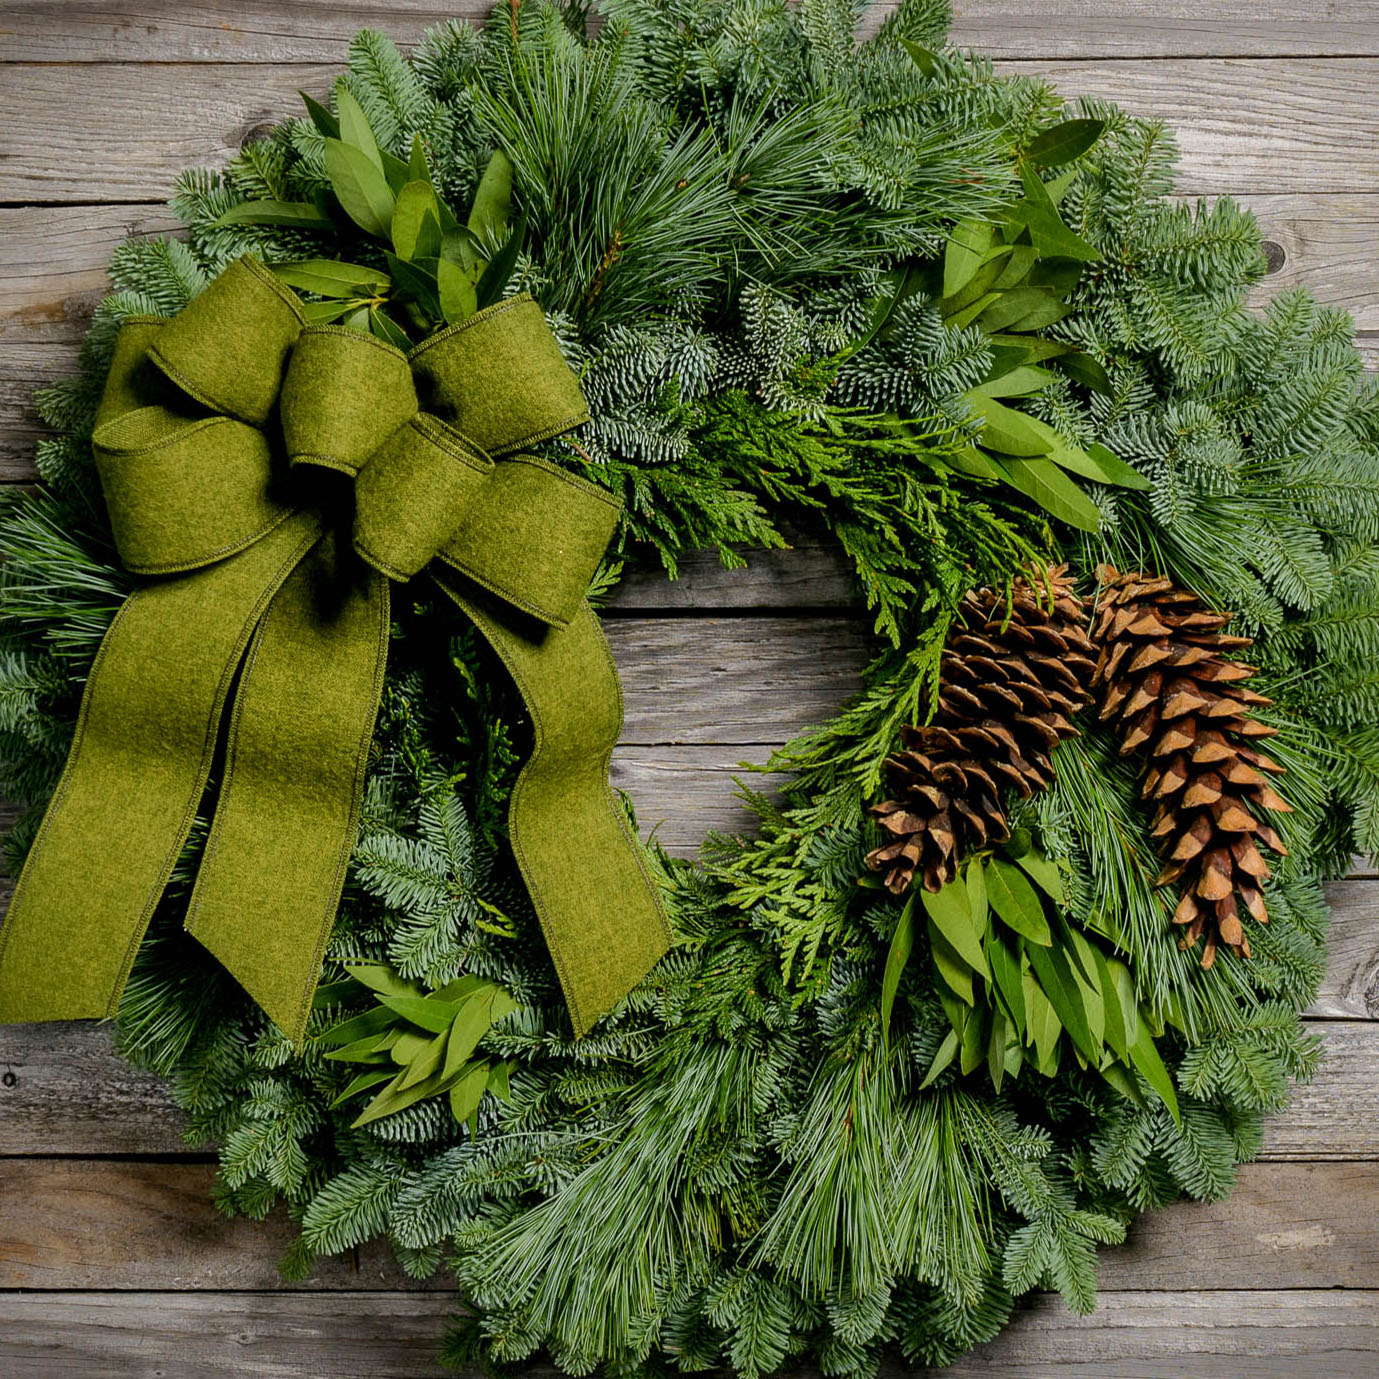 Christmas wreath with bay leaves, pine cones with a moss green brushed linen bow on a light wood background.